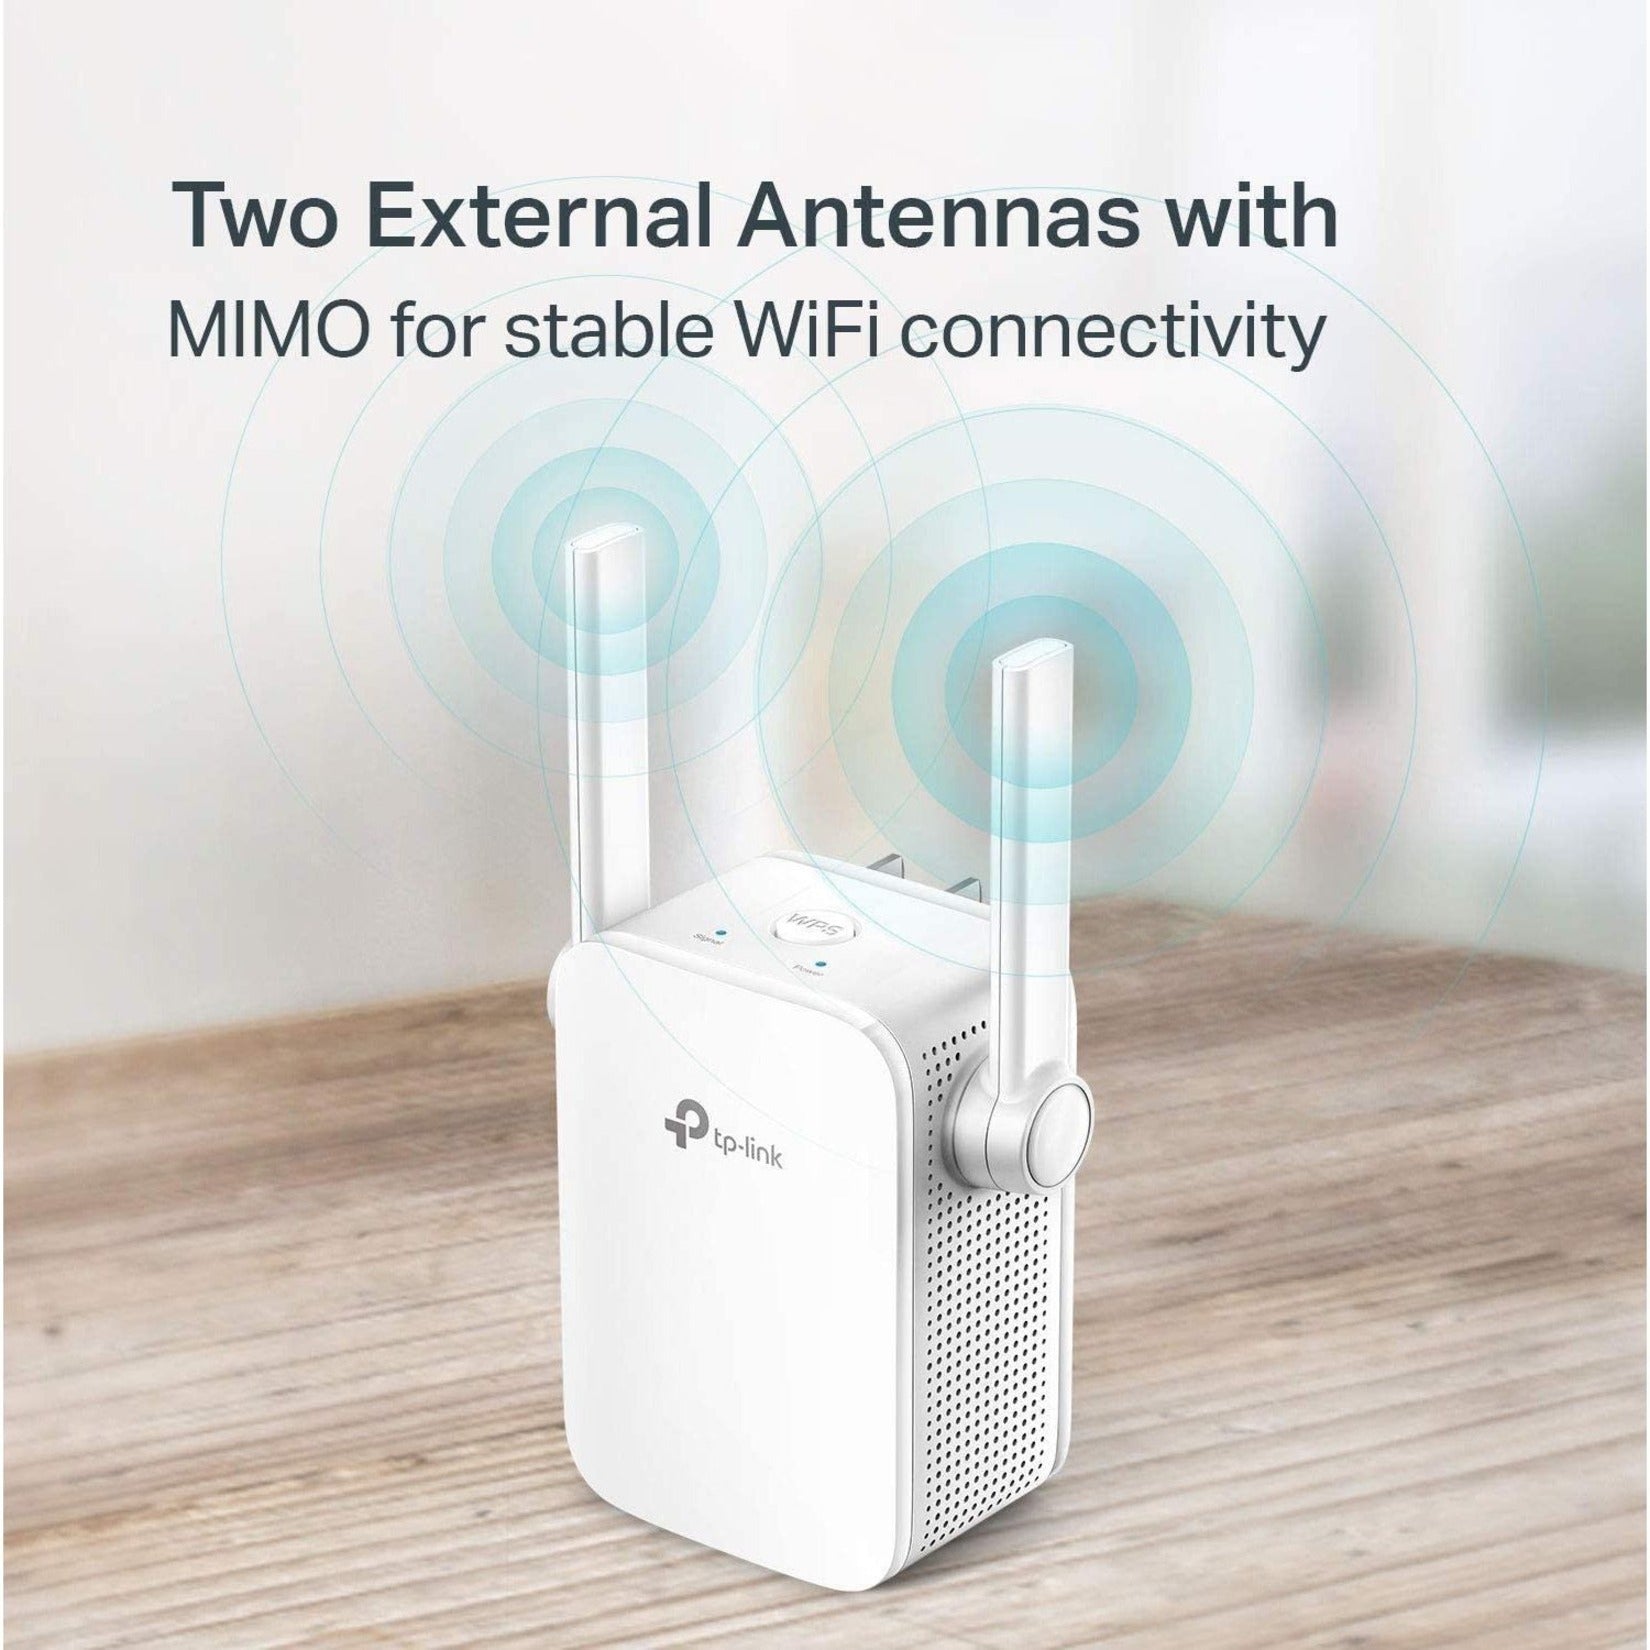 TP-Link RE105 Wireless Range Extender, IEEE 802.11n 300 Mbit/s, Extend Your Wi-Fi Coverage